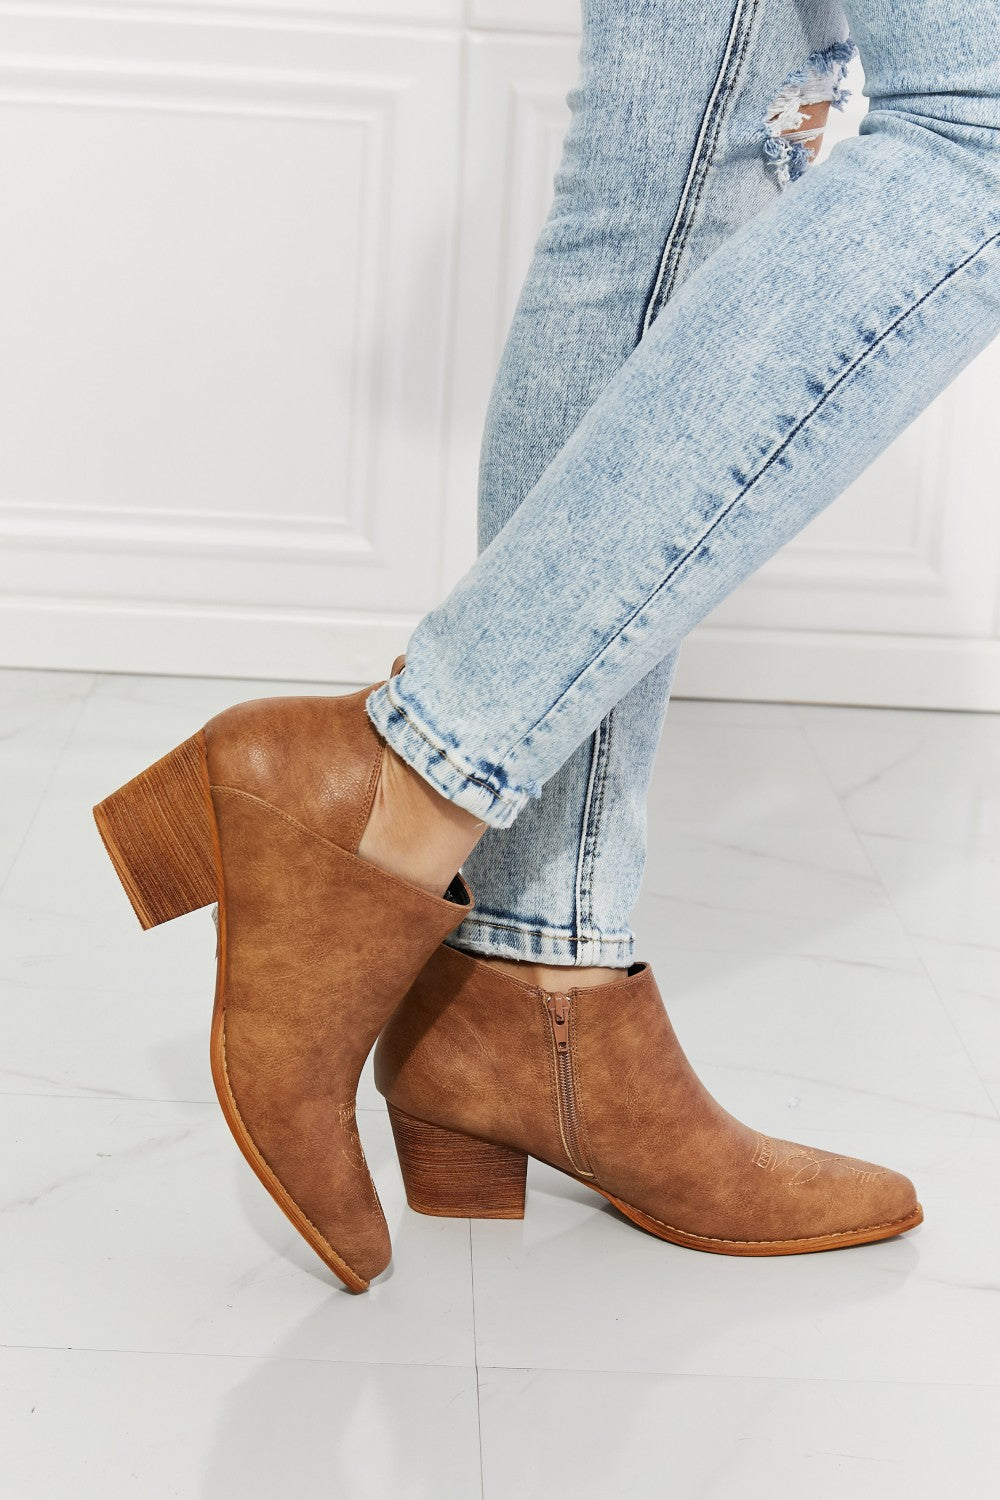 Embroidered Crossover Cowboy Bootie in Caramel - Alaena James Boutique